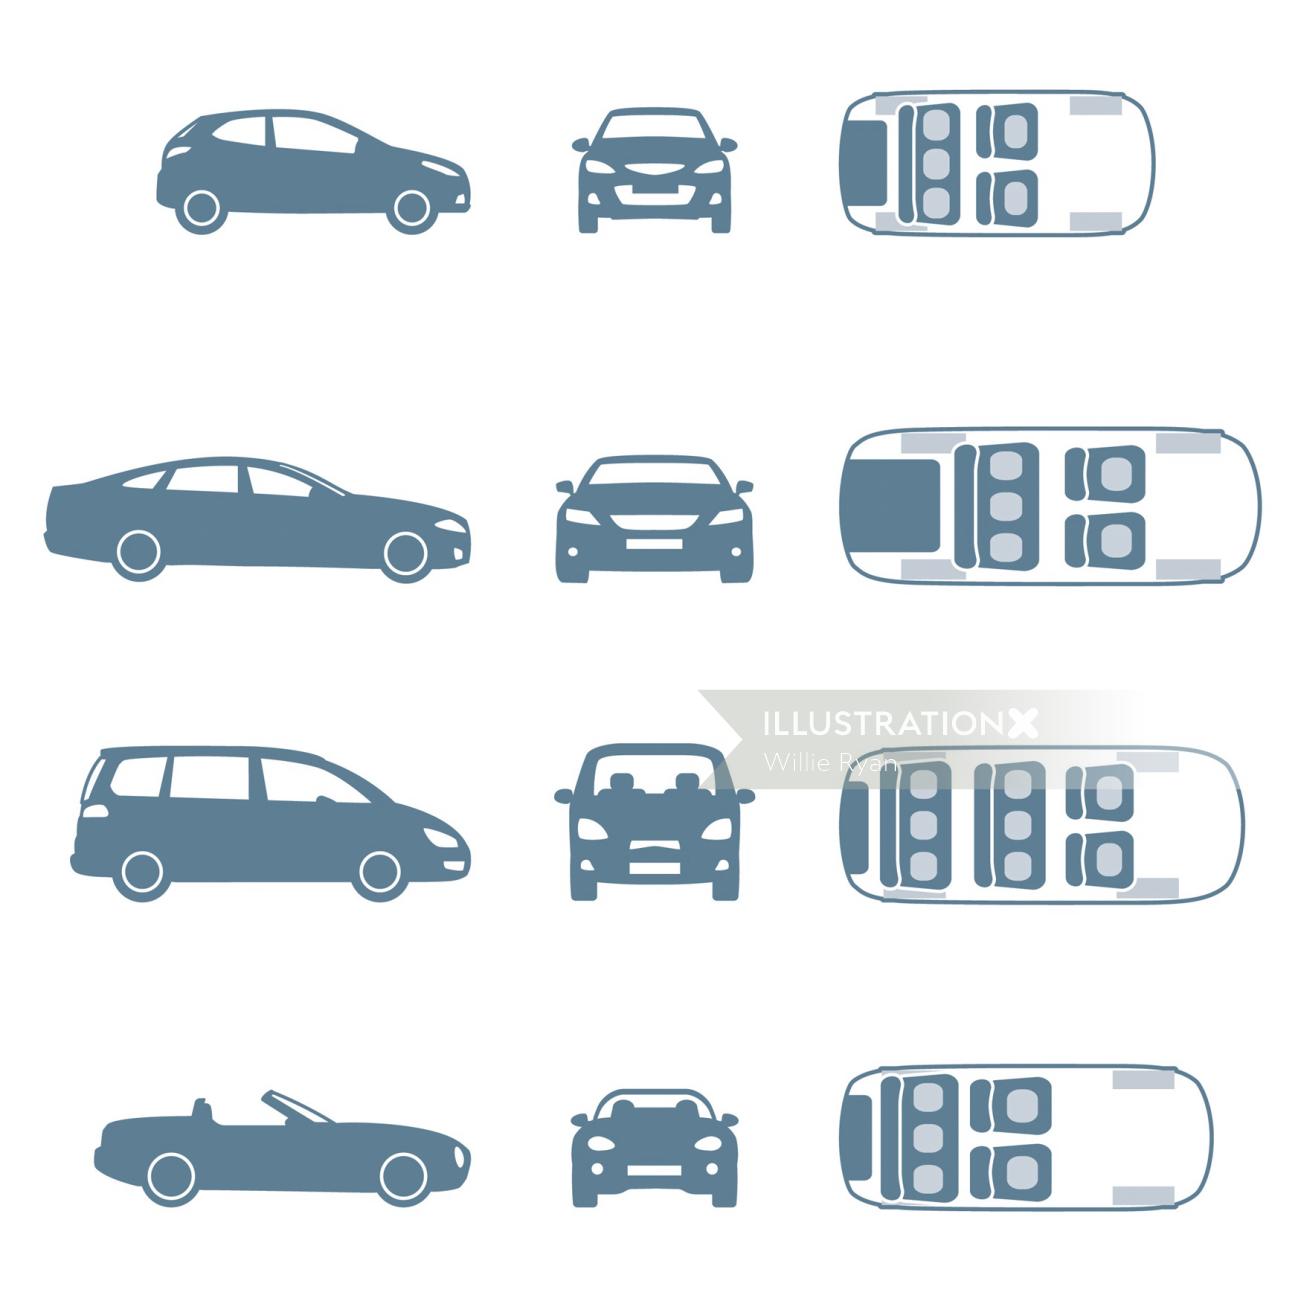 Vector illustration of different model cars